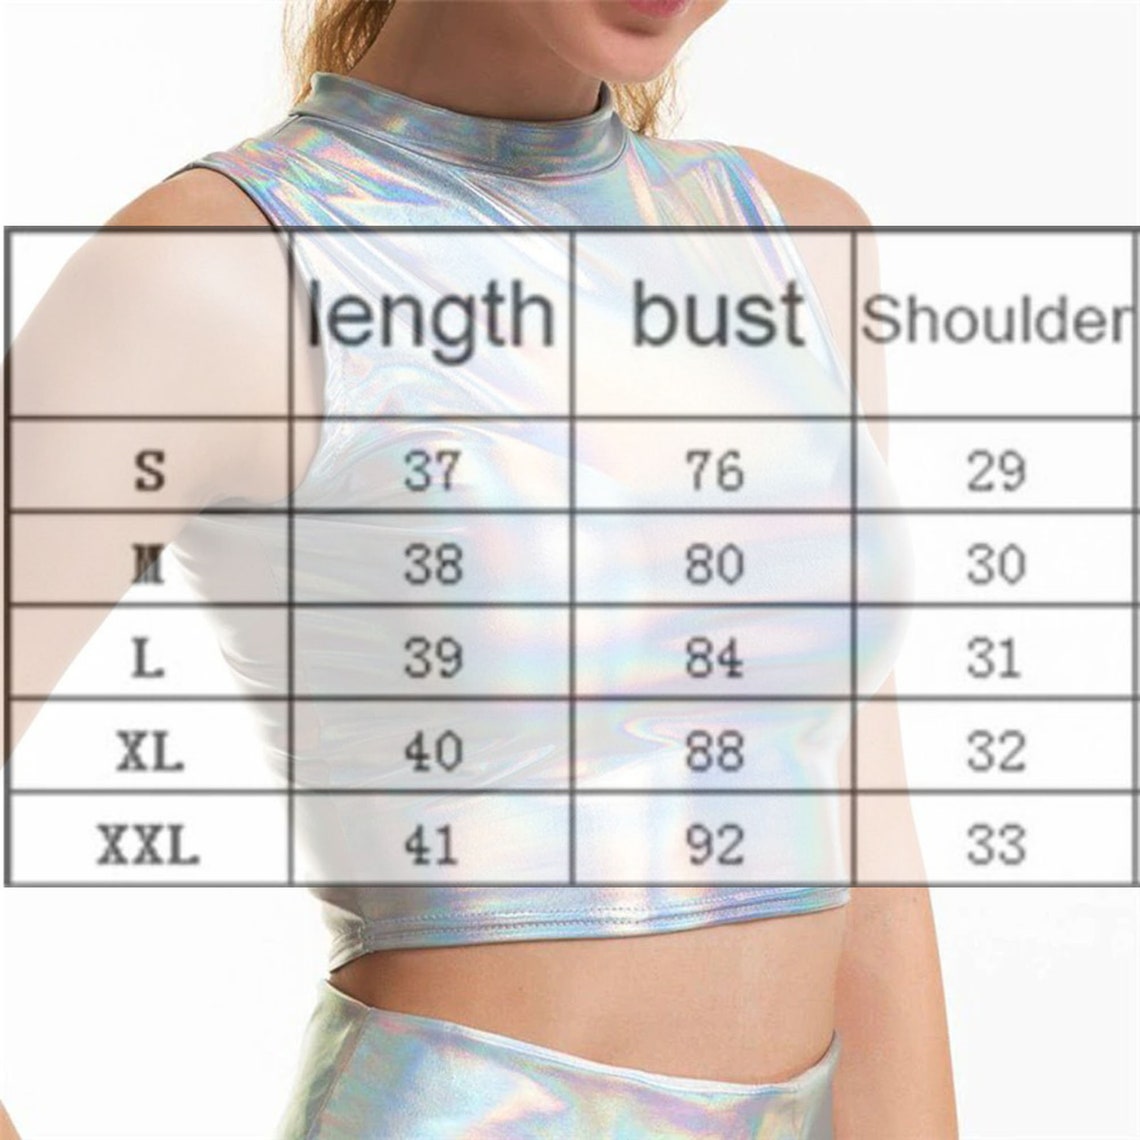 Silver Holographic Sleeveless Style Women's Sexy Top